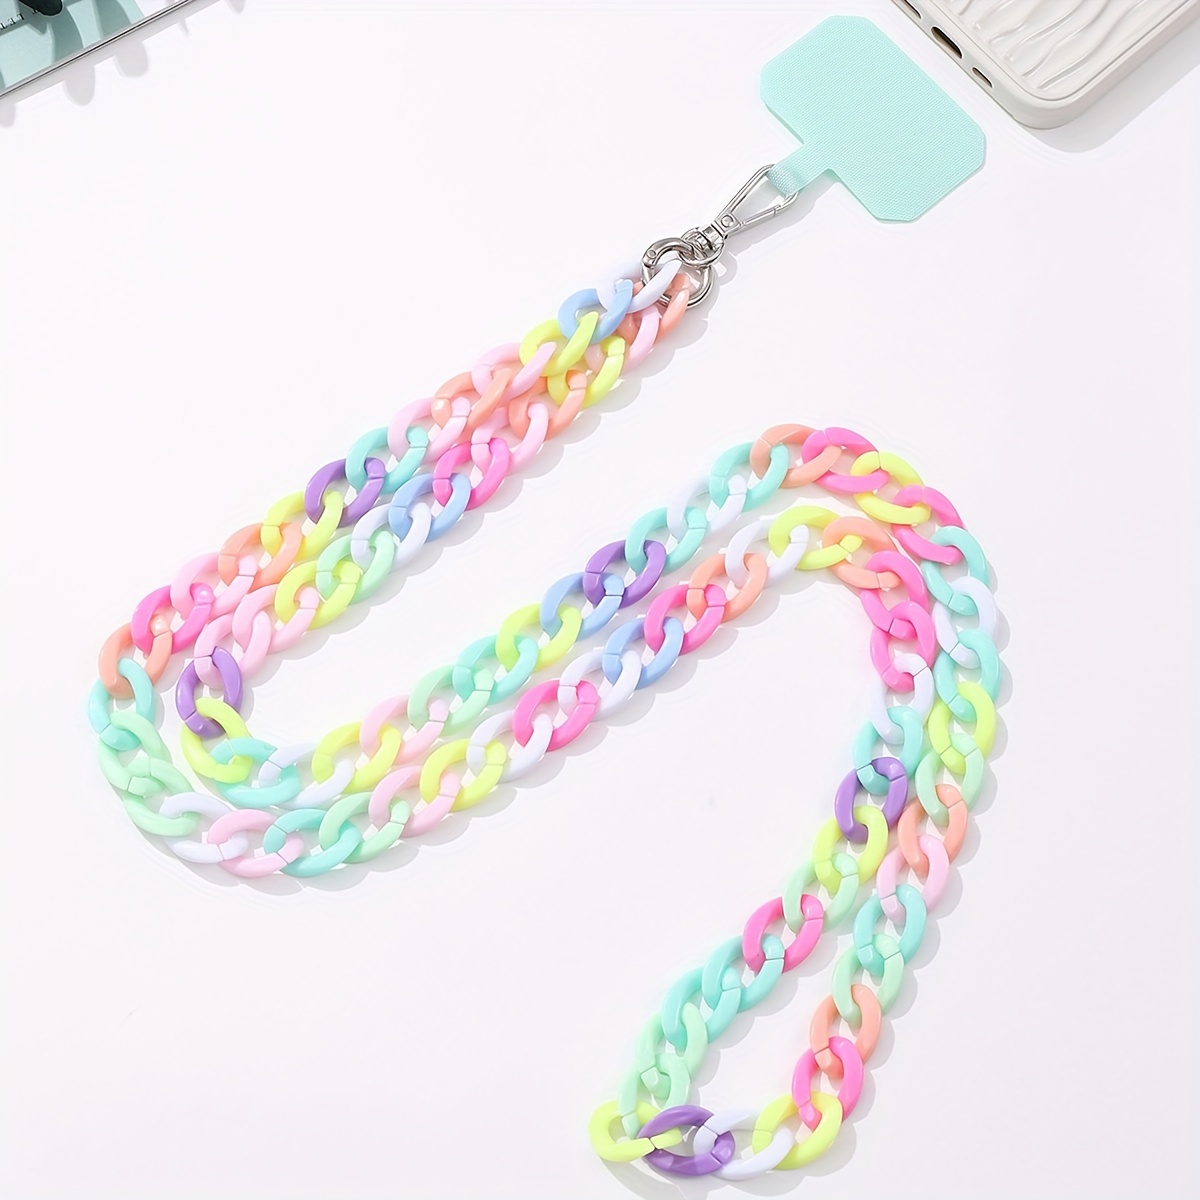 

Colorful Acrylic Crossbody Phone Case Chain - Anti-lost & Drop-proof Shoulder Strap Accessory, Single Piece